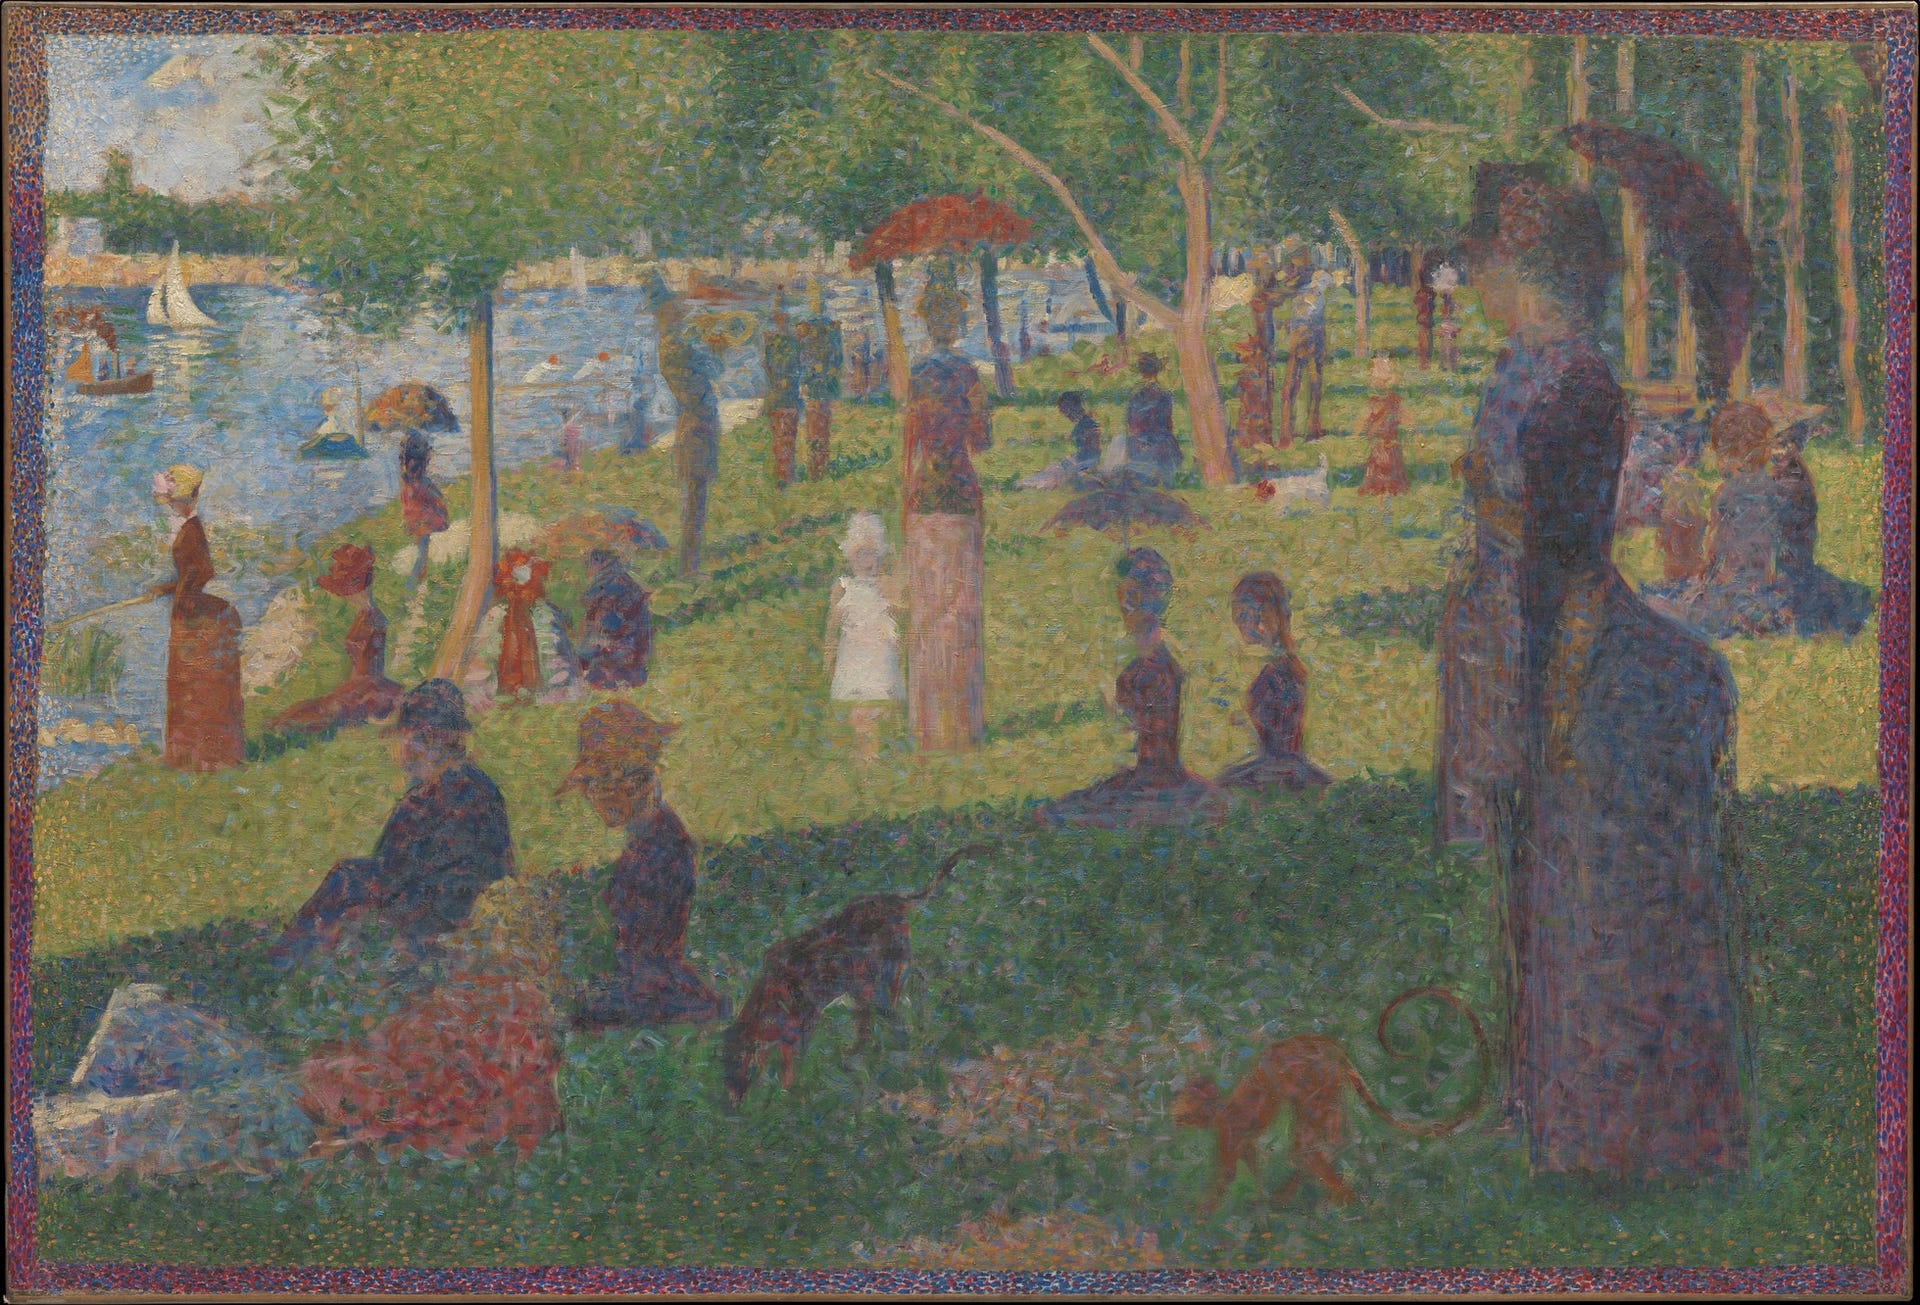 Georges Seurat's painting 